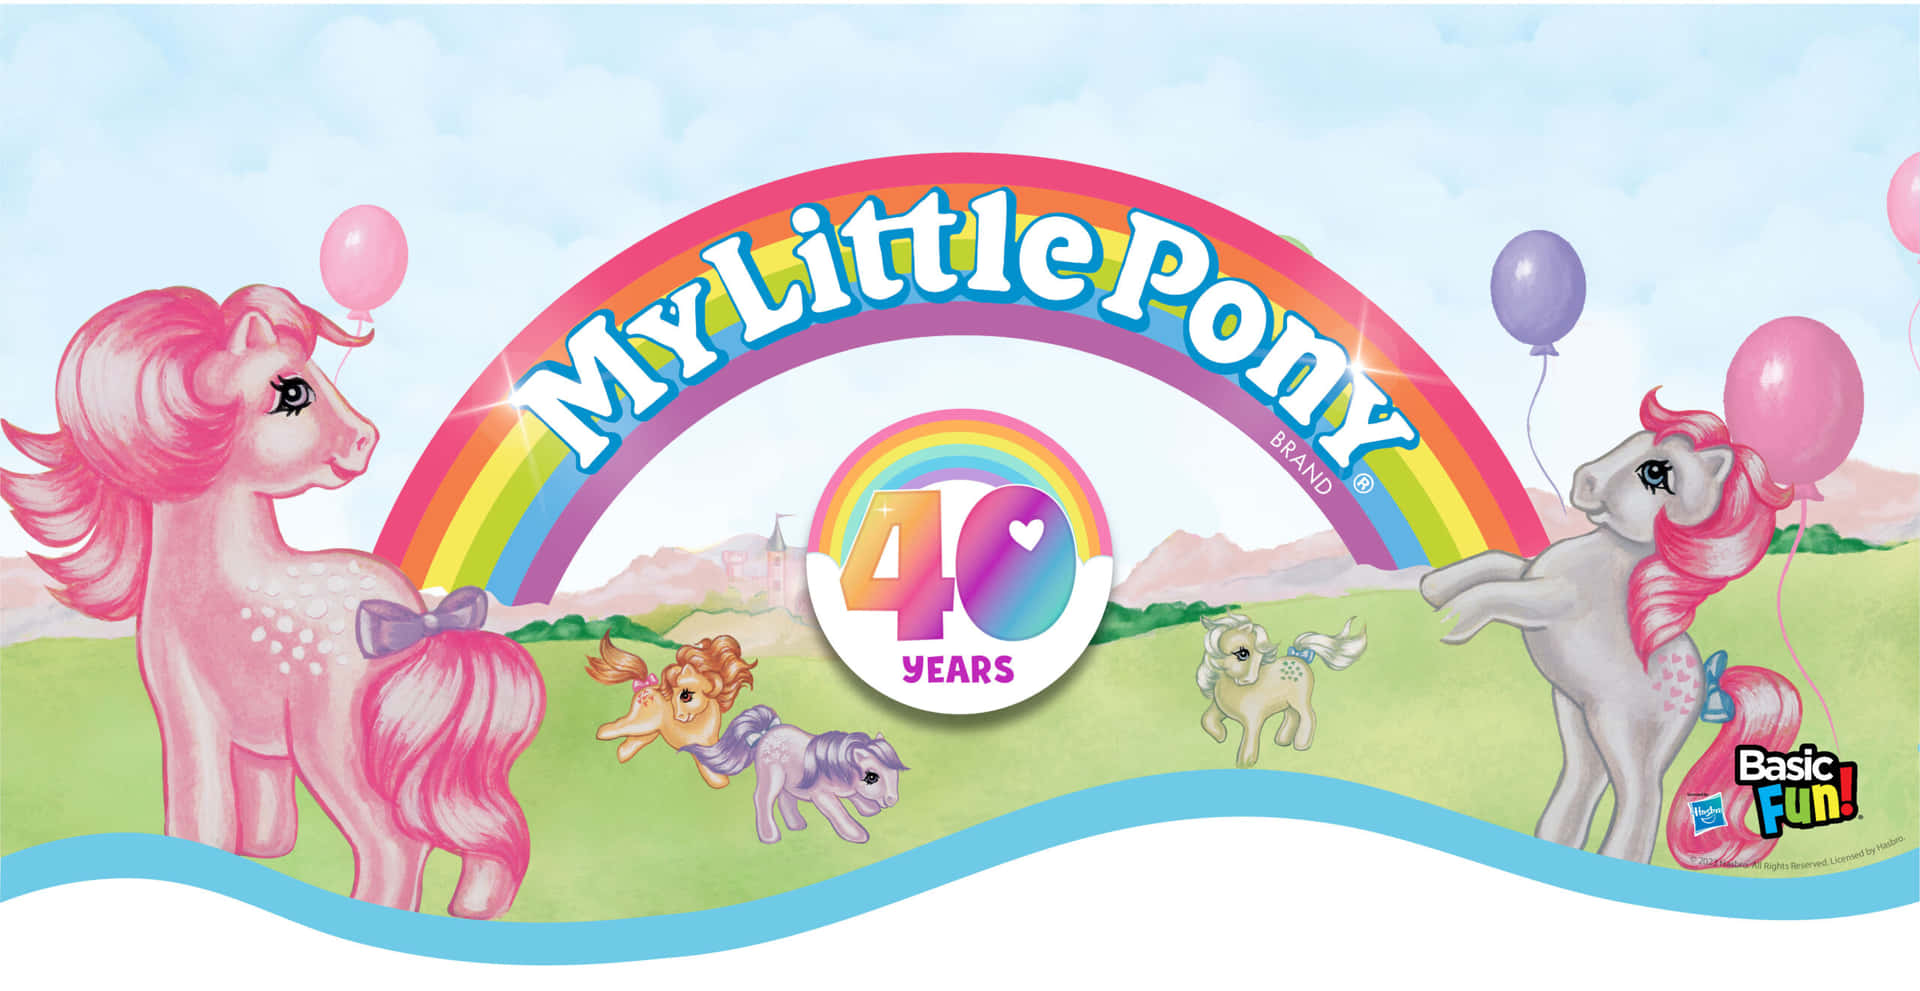 My Little Pony 40 Years Cover Picture